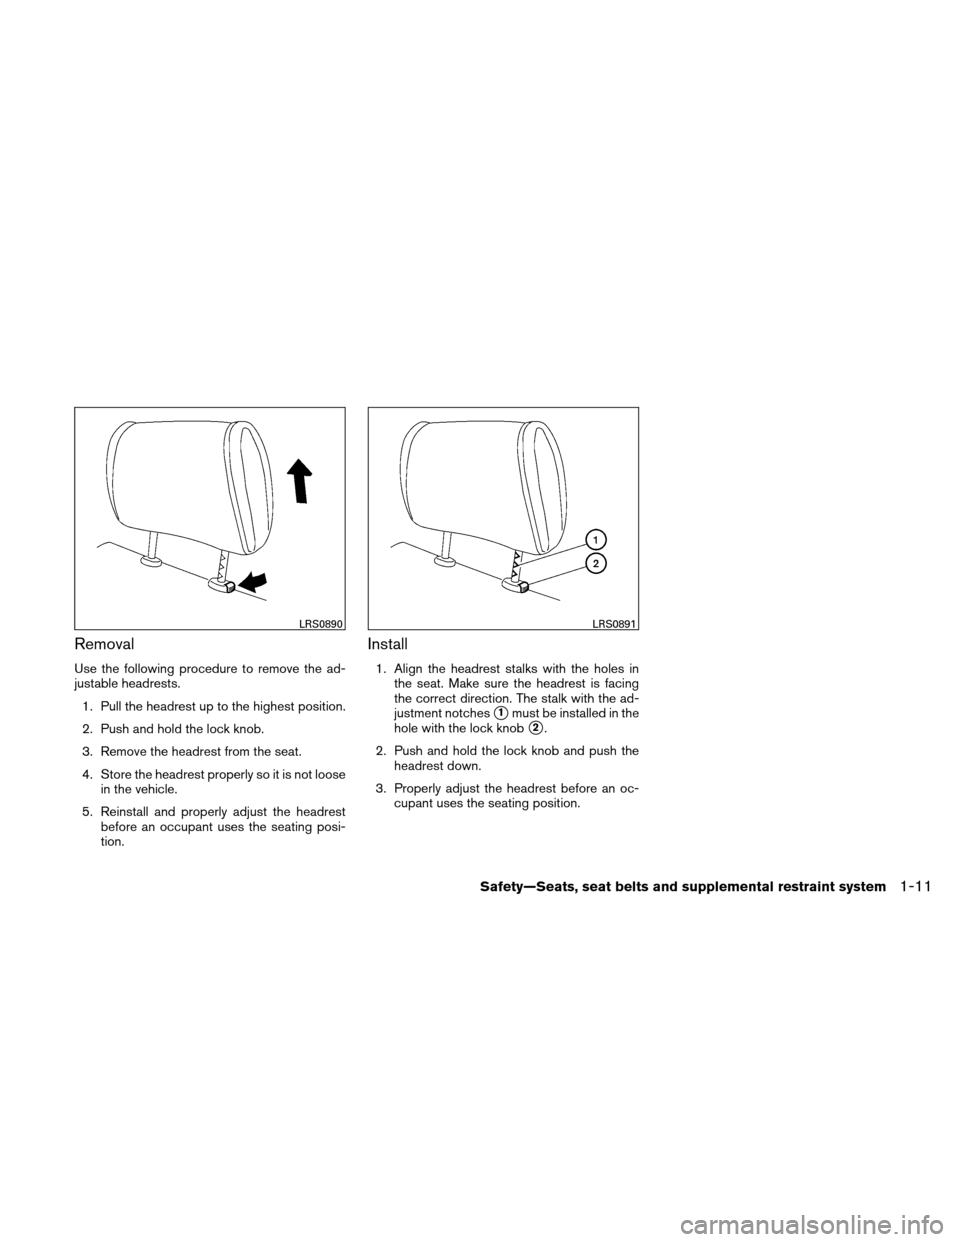 NISSAN VERSA HATCHBACK 2010 1.G Owners Manual Removal
Use the following procedure to remove the ad-
justable headrests.1. Pull the headrest up to the highest position.
2. Push and hold the lock knob.
3. Remove the headrest from the seat.
4. Store